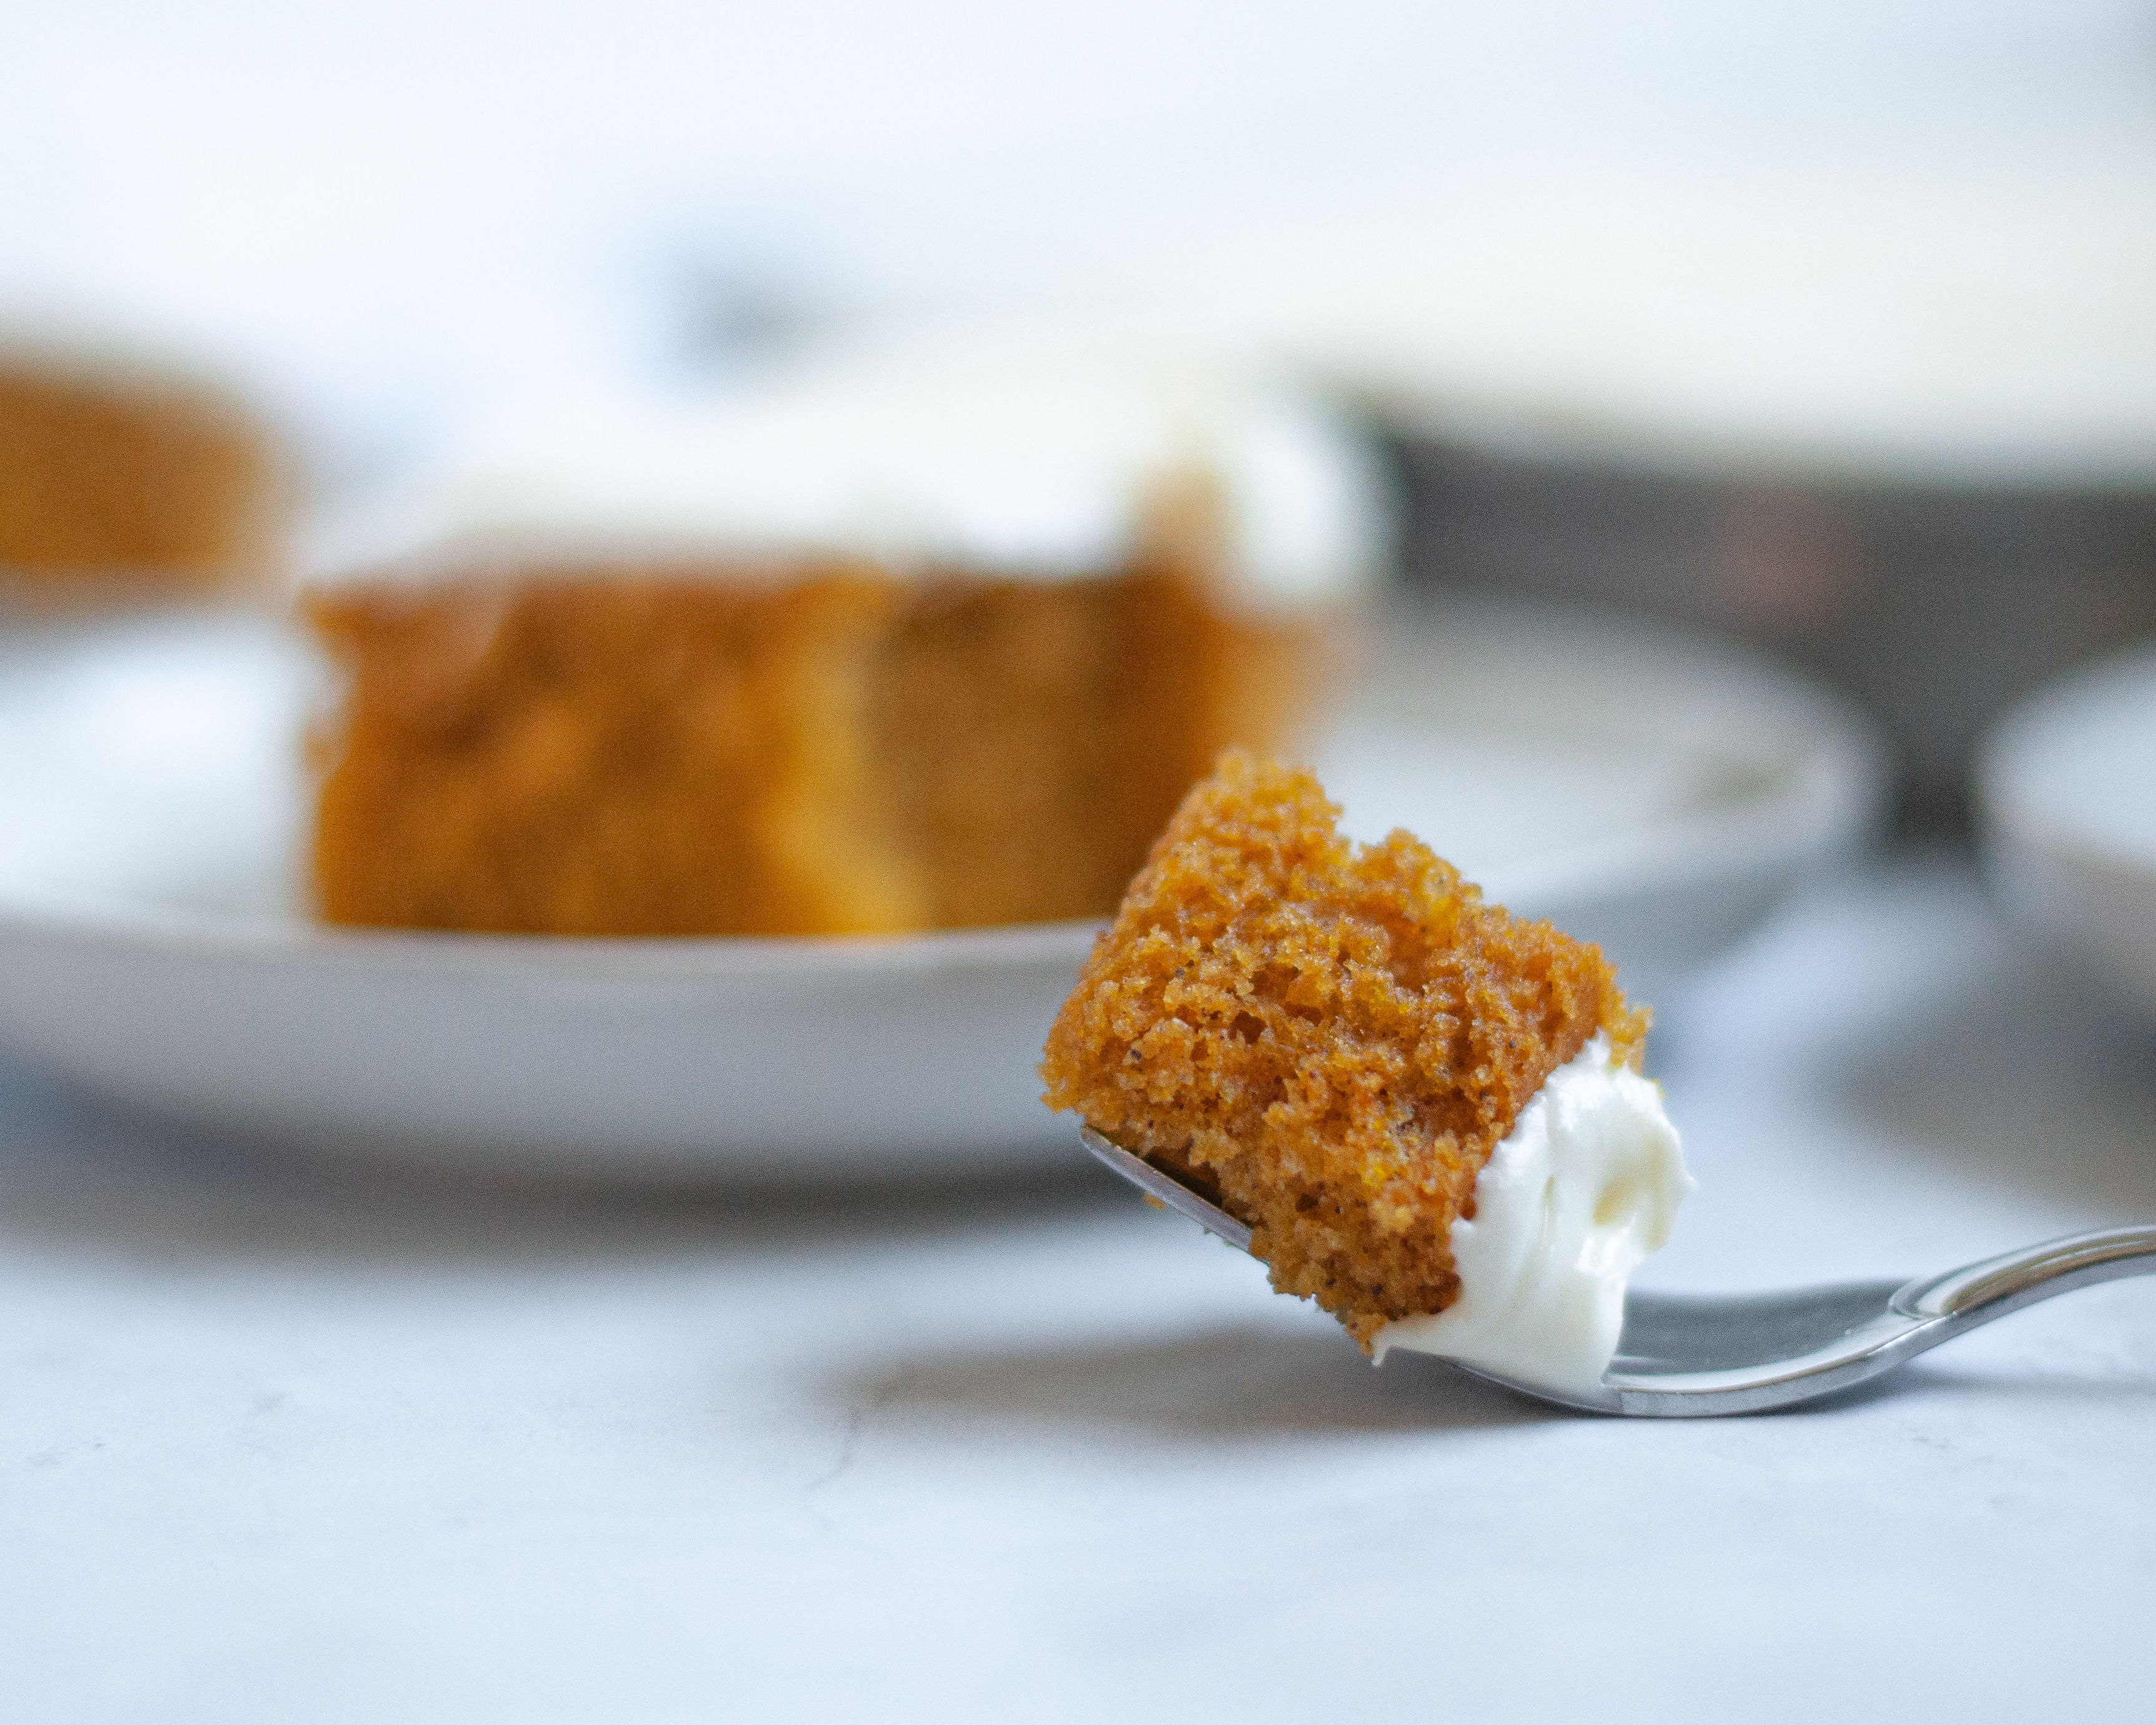 Close up of a fork with a bite of pumpkin bar on it. In the background you can see a plate with a pumpkin square on it